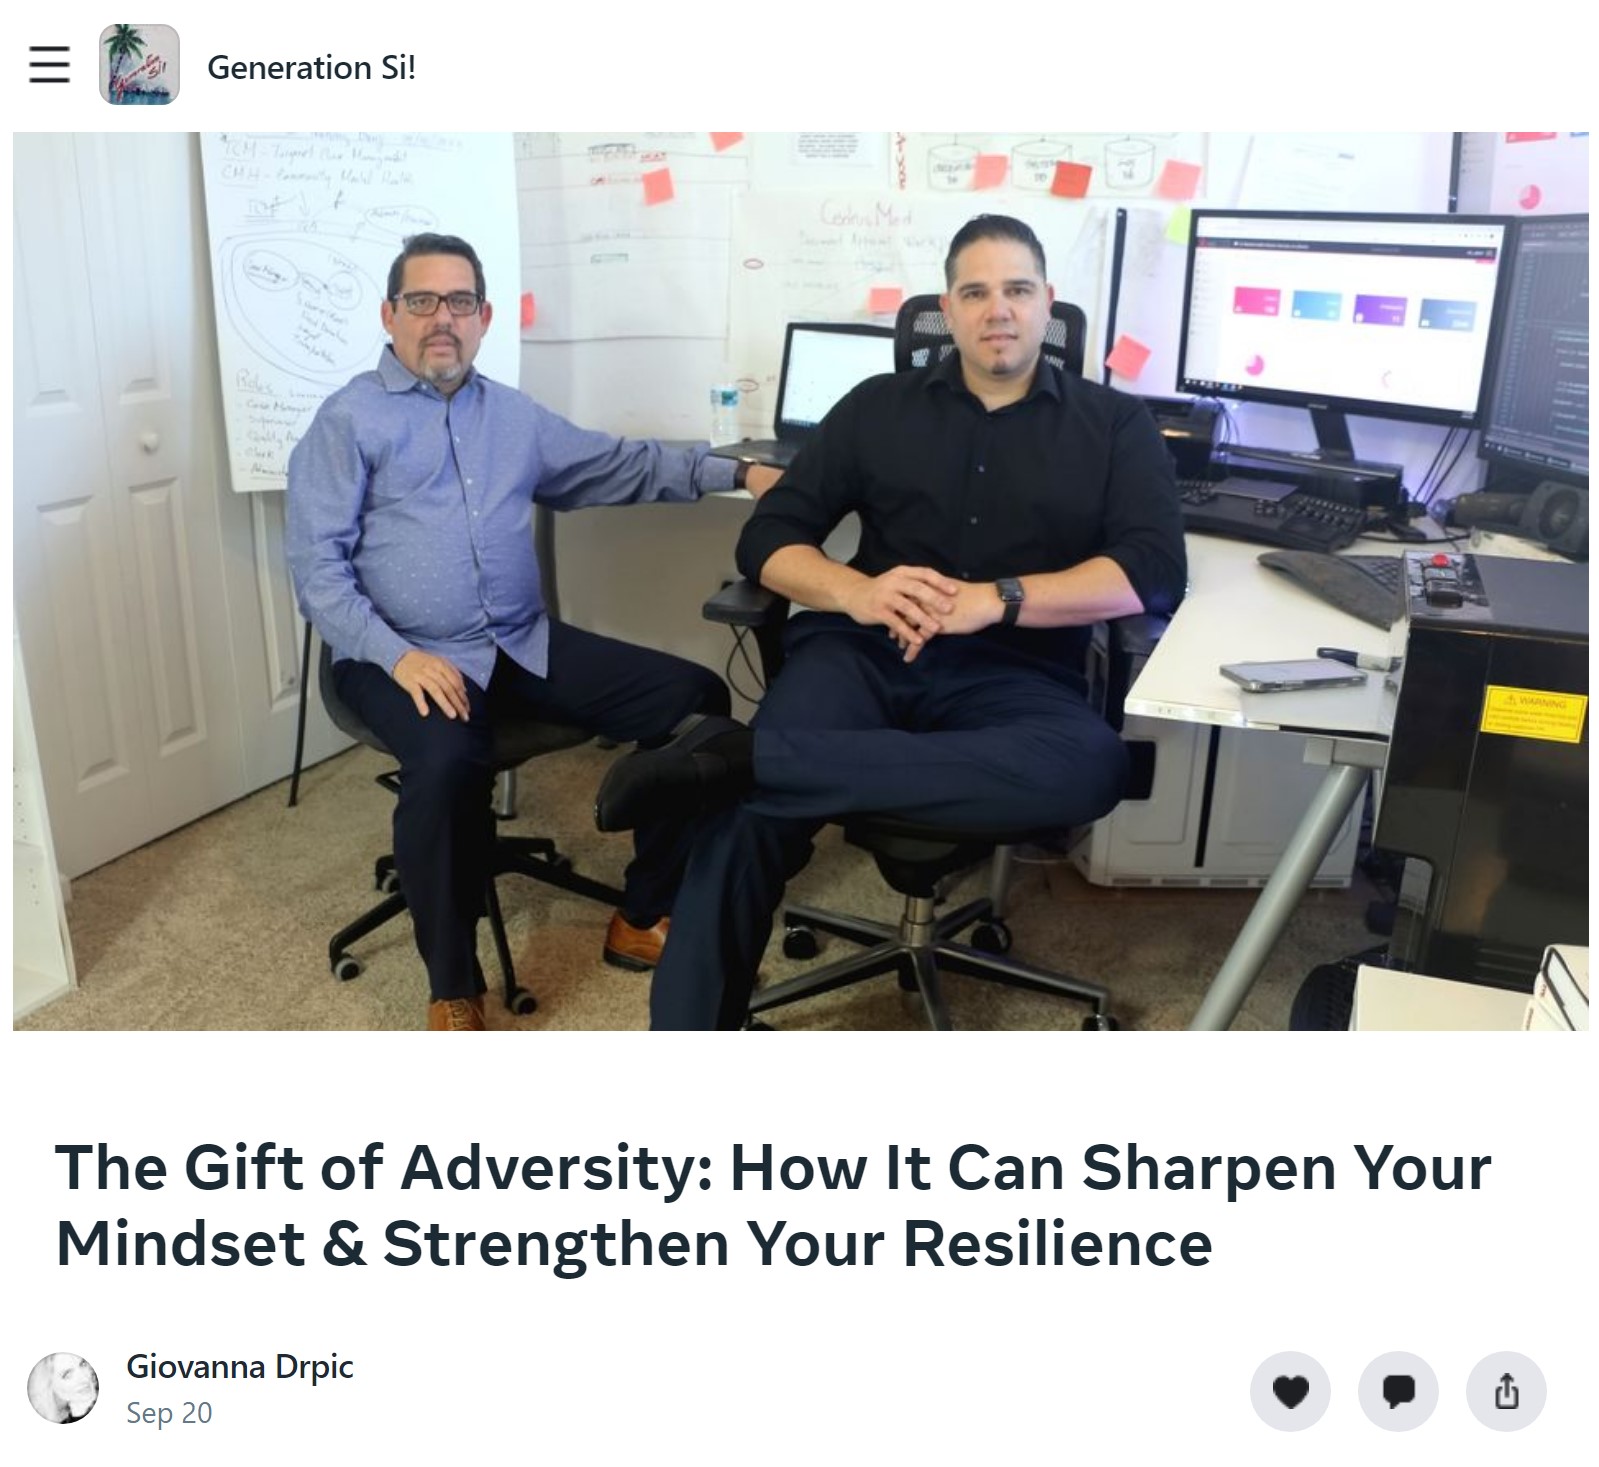 The Gift of Adversity: How It Can Sharpen Your Mindset & Strengthen Your Resilience